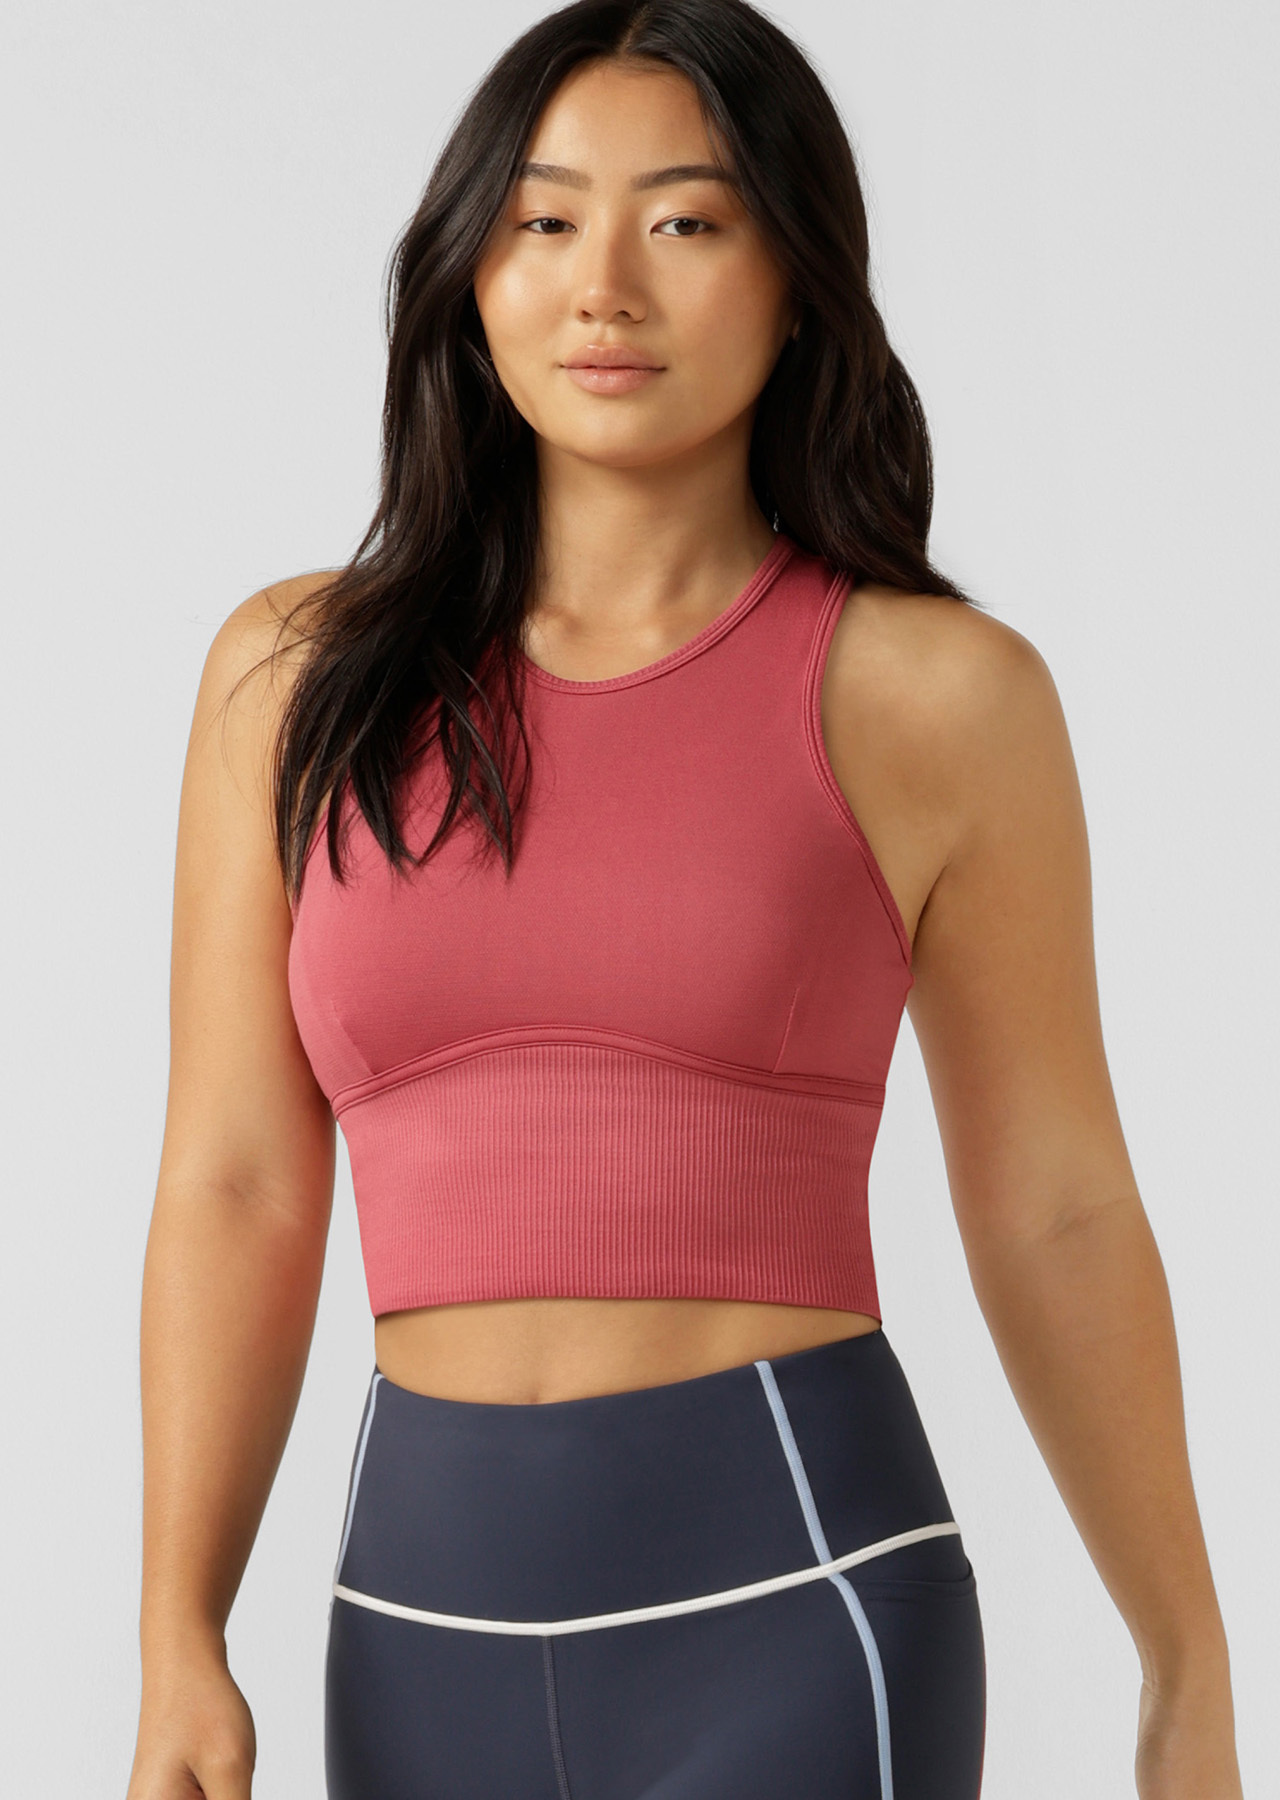 Express Body Contour Mesh Crop Top With Removable Cups Women's XS